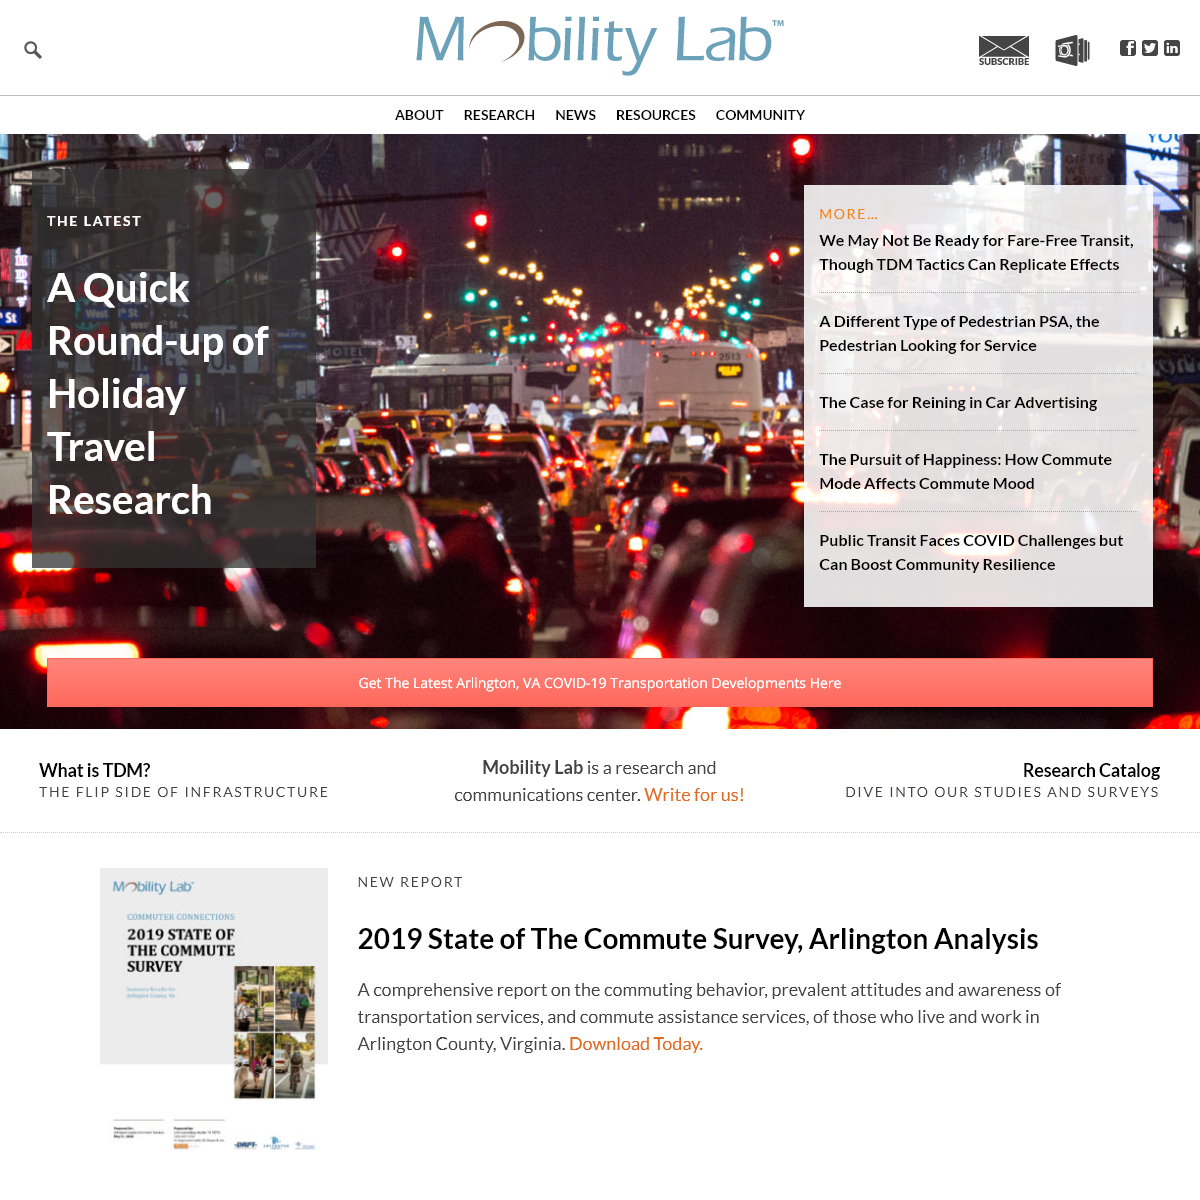 A complete backup of mobilitylab.org